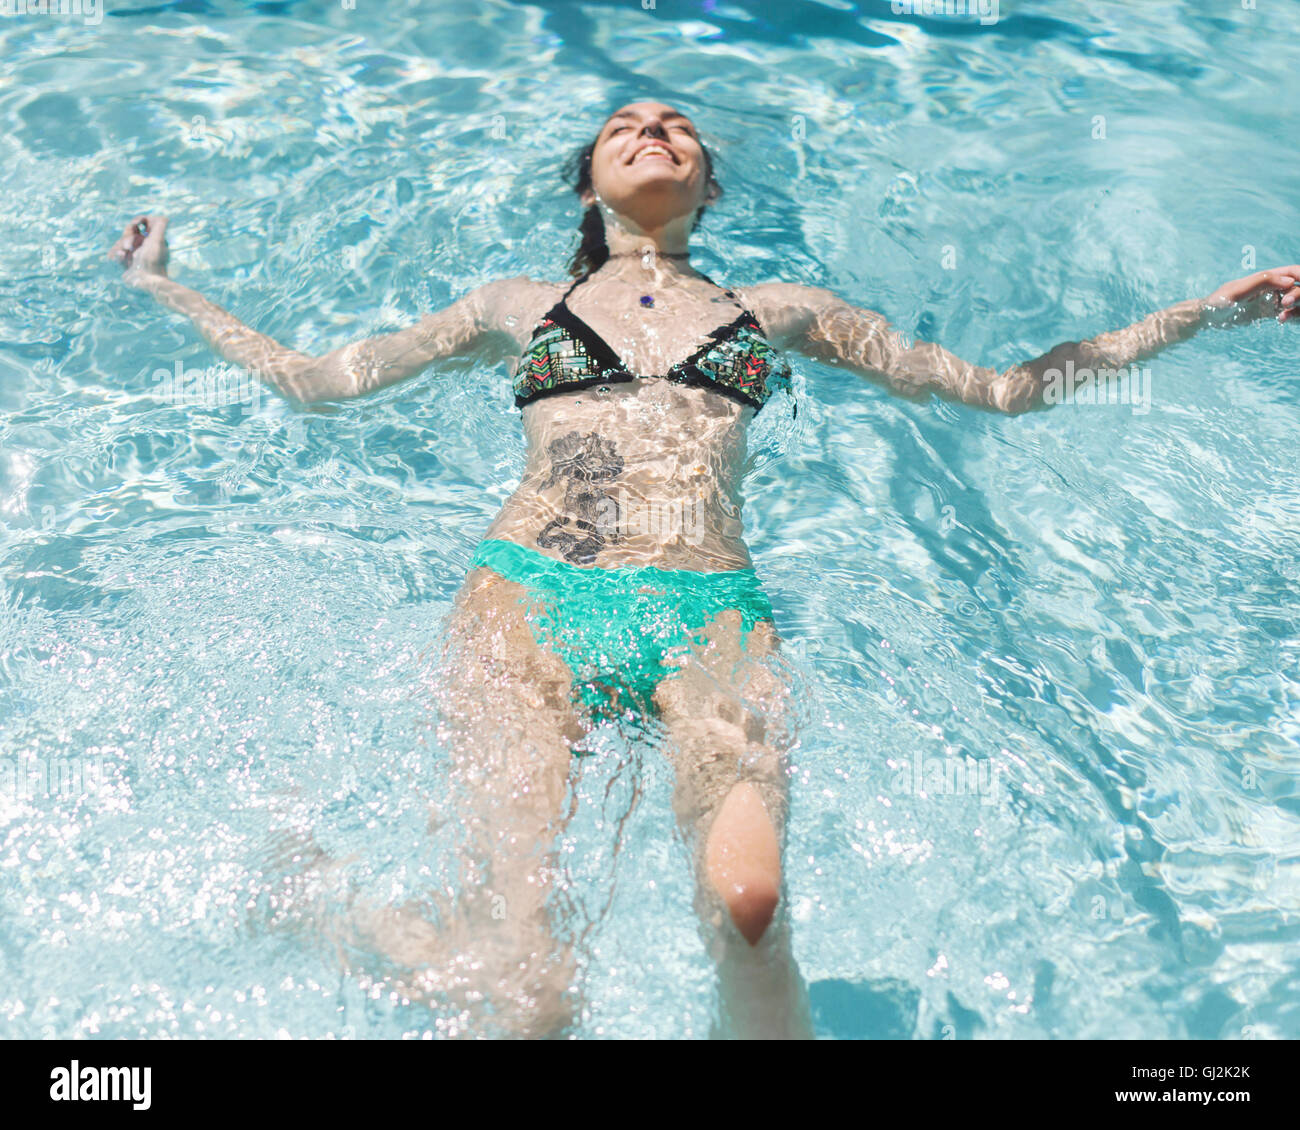 Woman floating in pool Banque D'Images